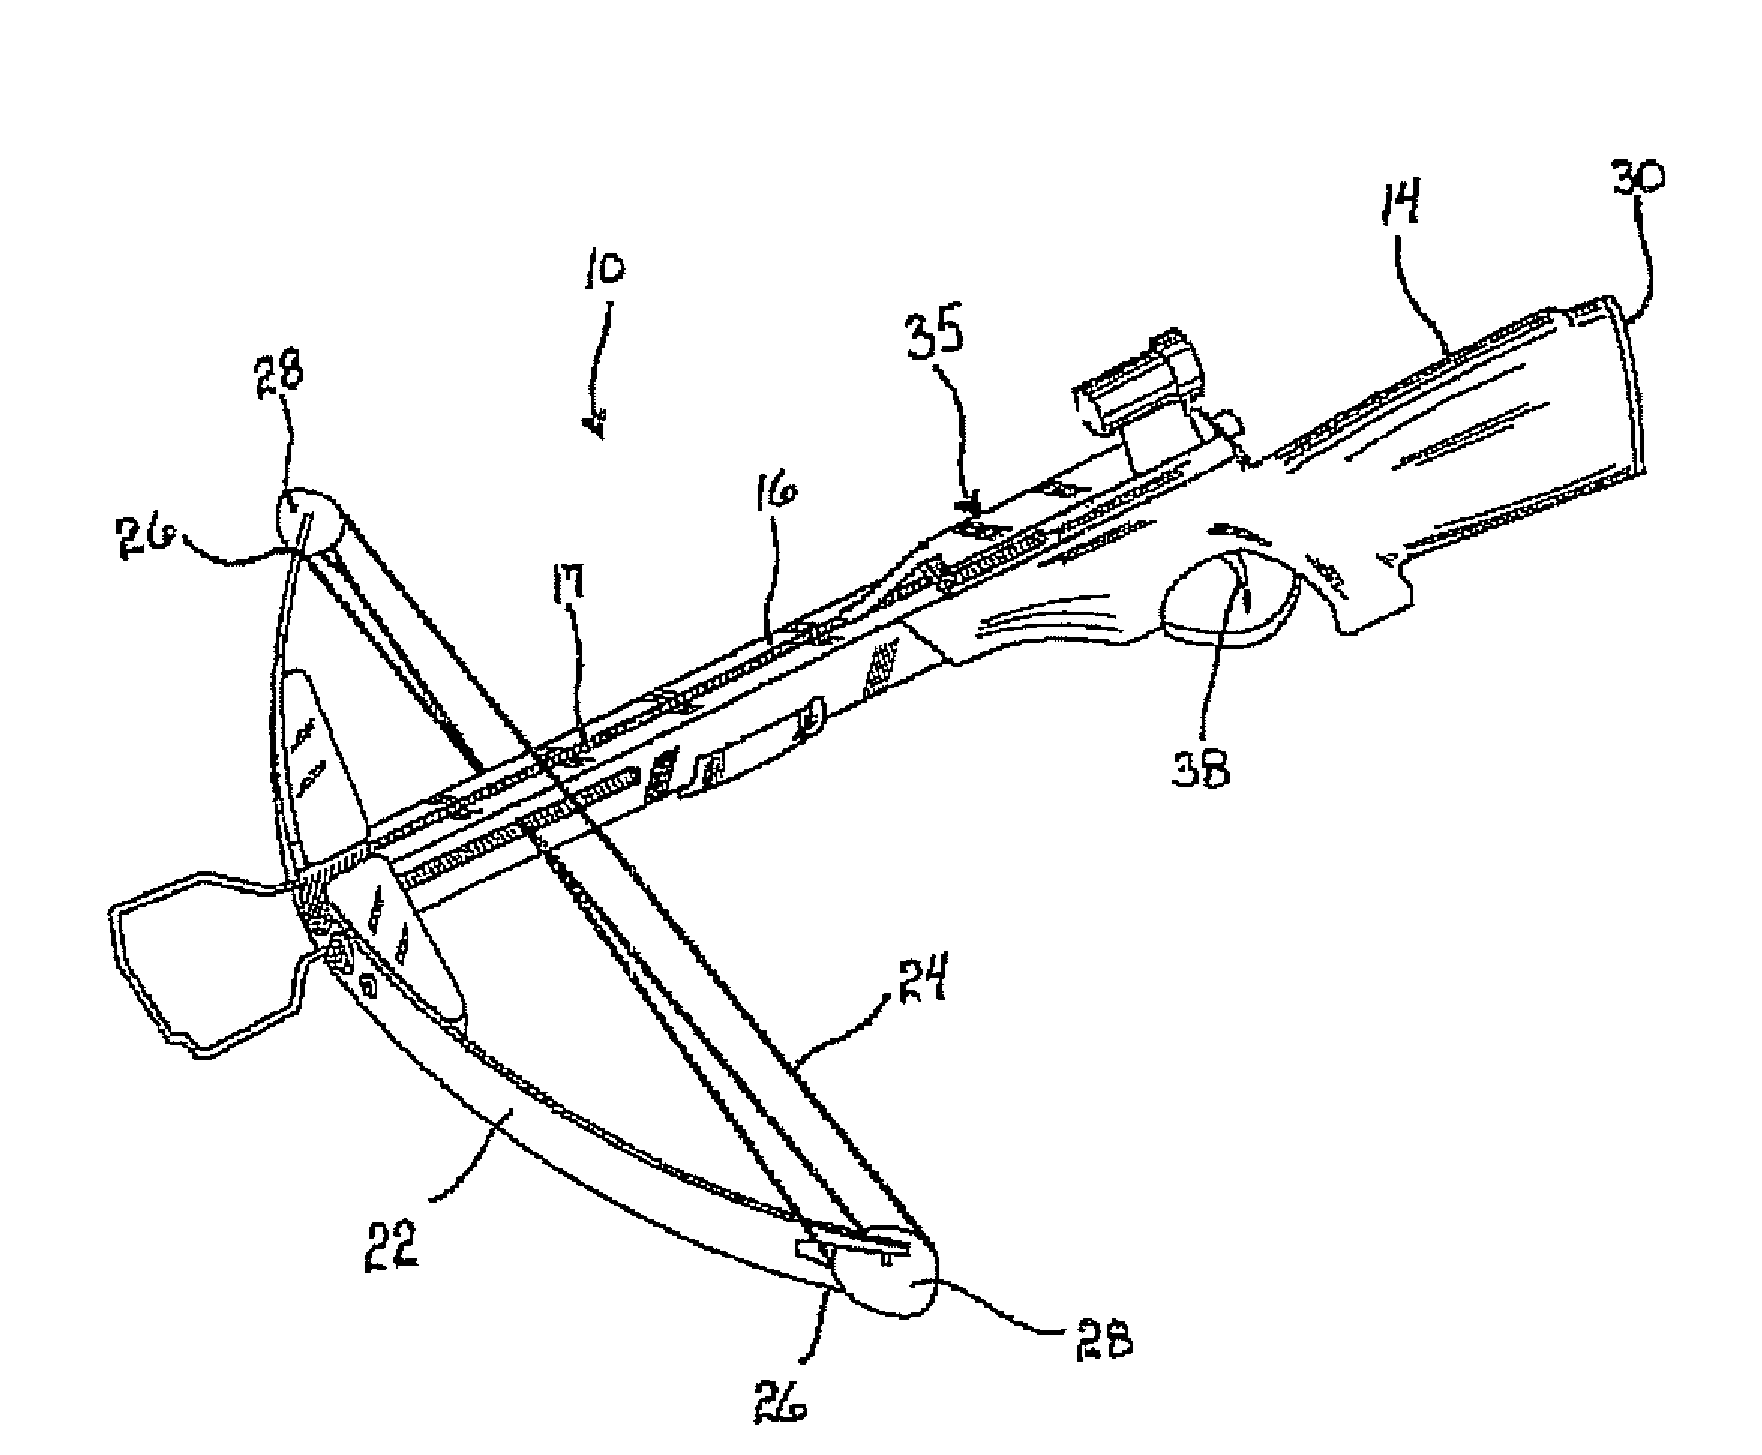 Trigger assembly for an archery device